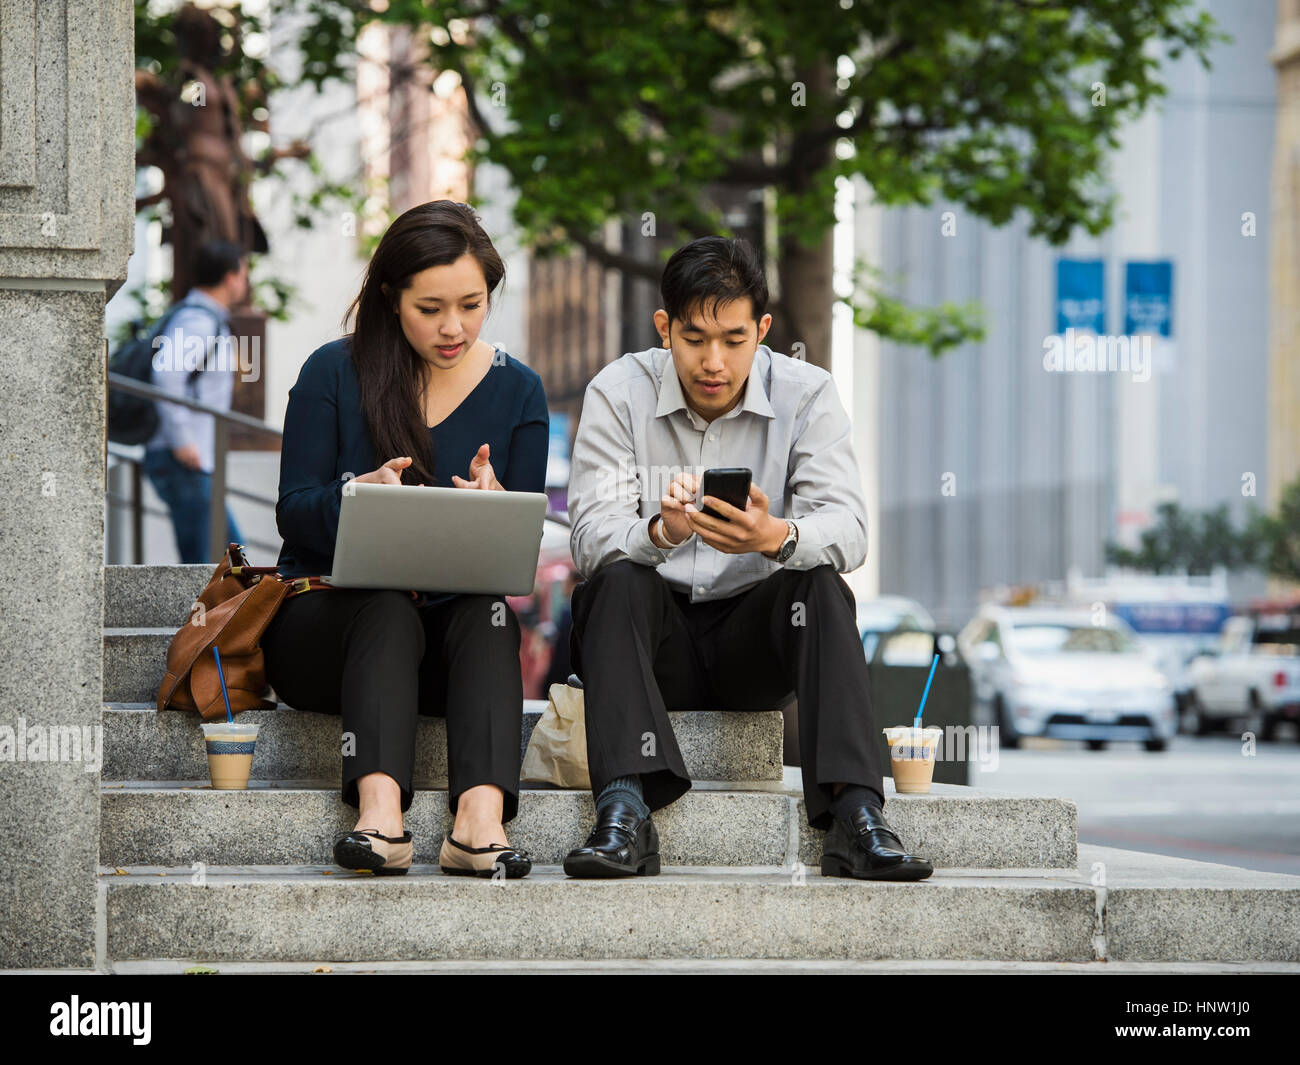 Chinese business people using technology during lunch in city Stock Photo